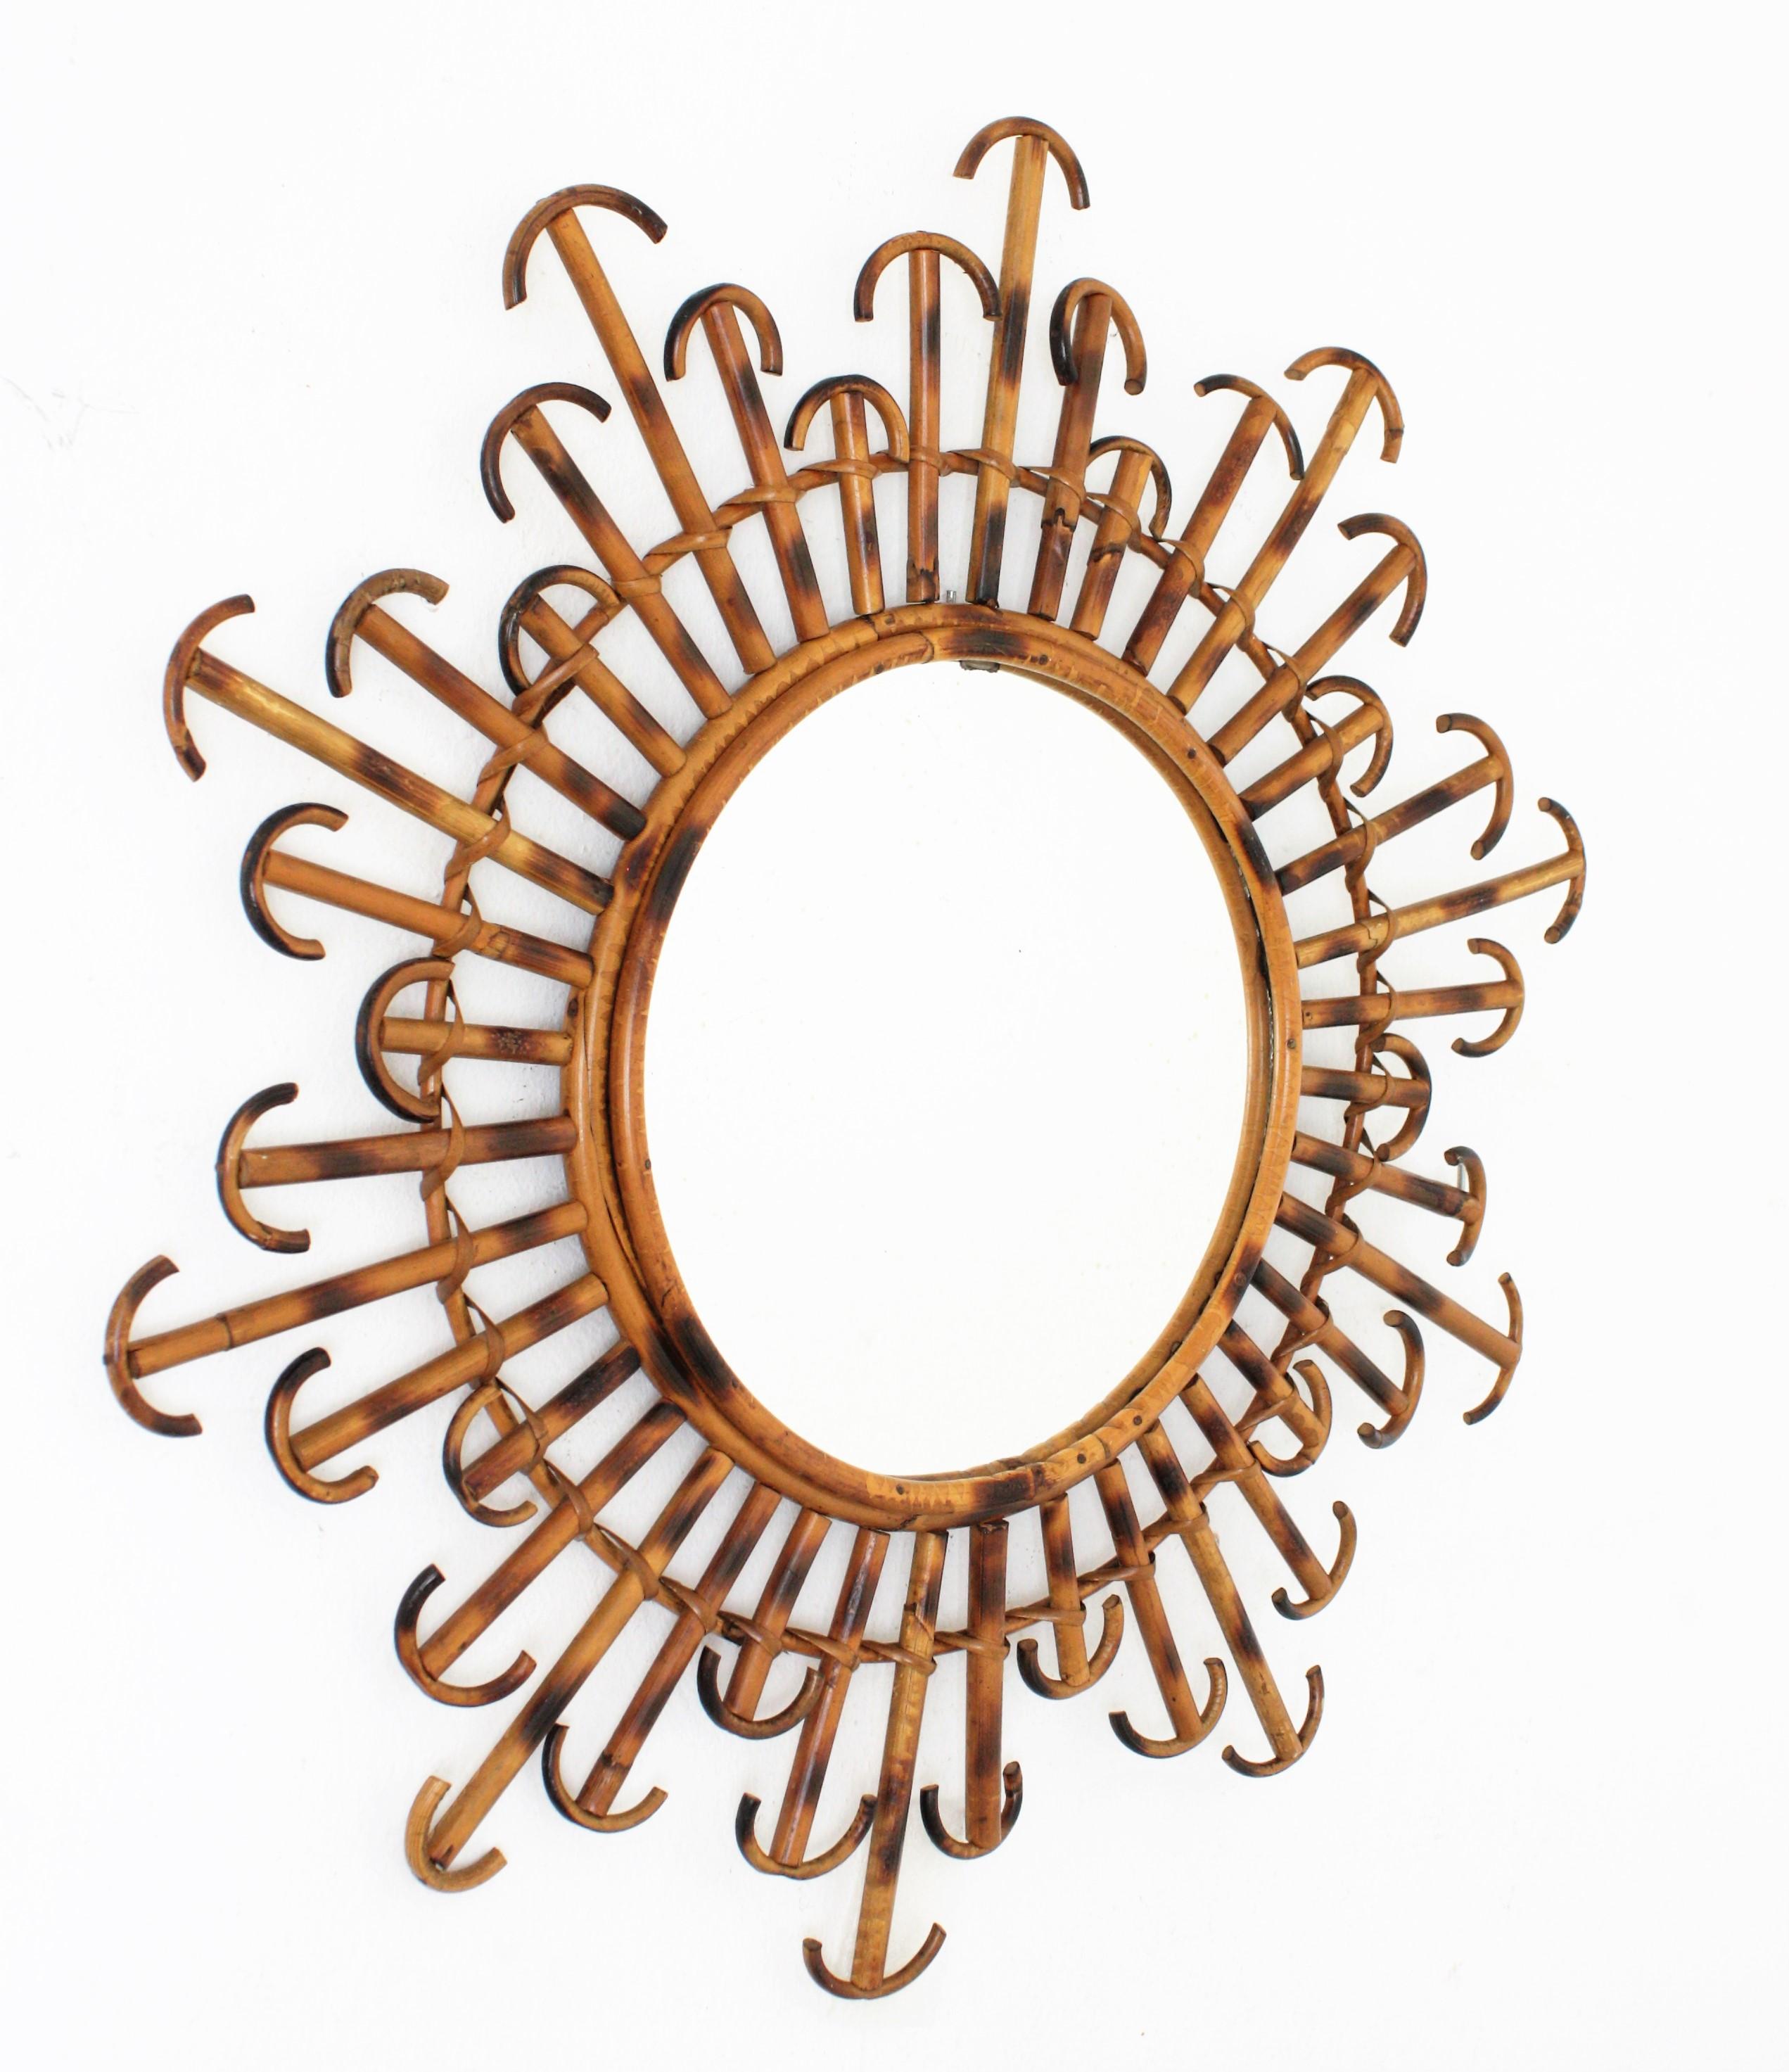 Mid-Century Modern French Rattan Wicker Sunburst Mirror with Curved Endings, 1950s